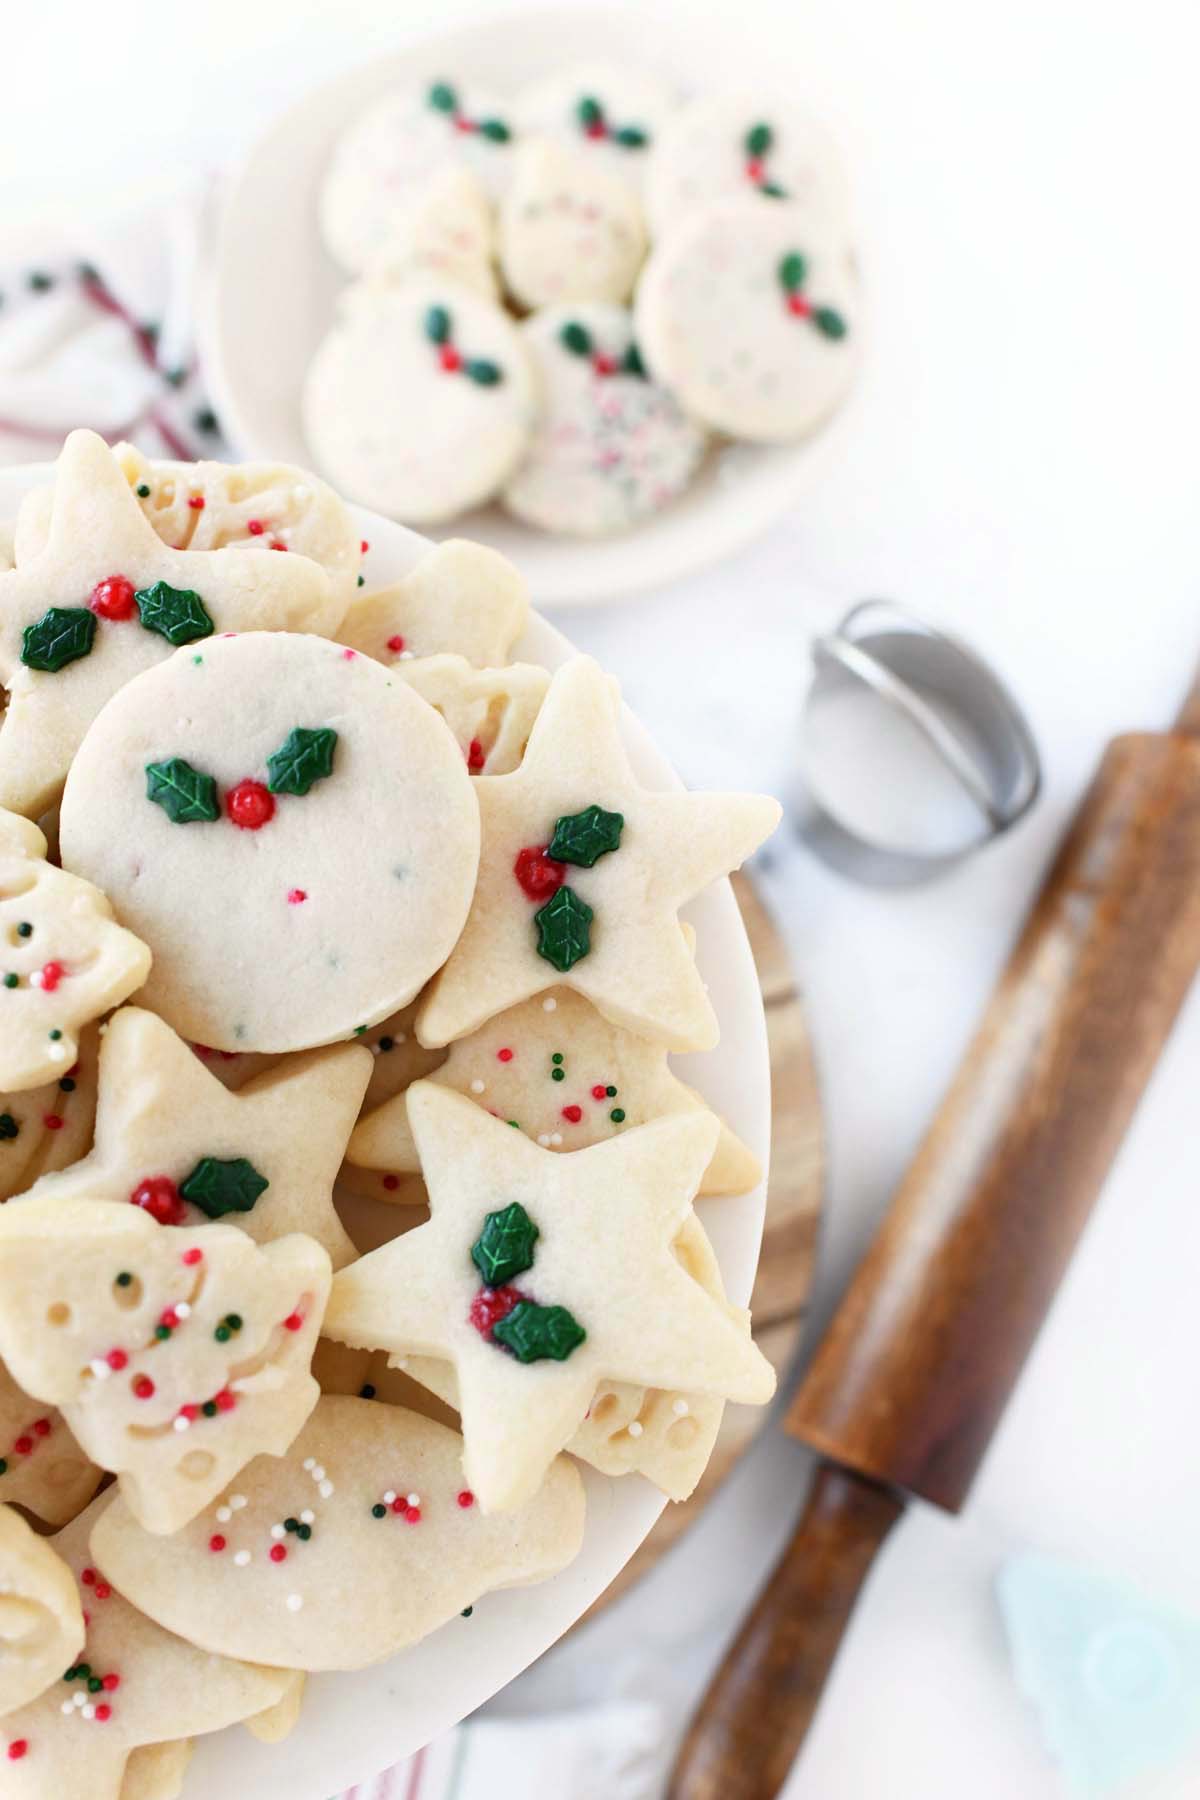 A plate of festive holiday cookie cutouts.